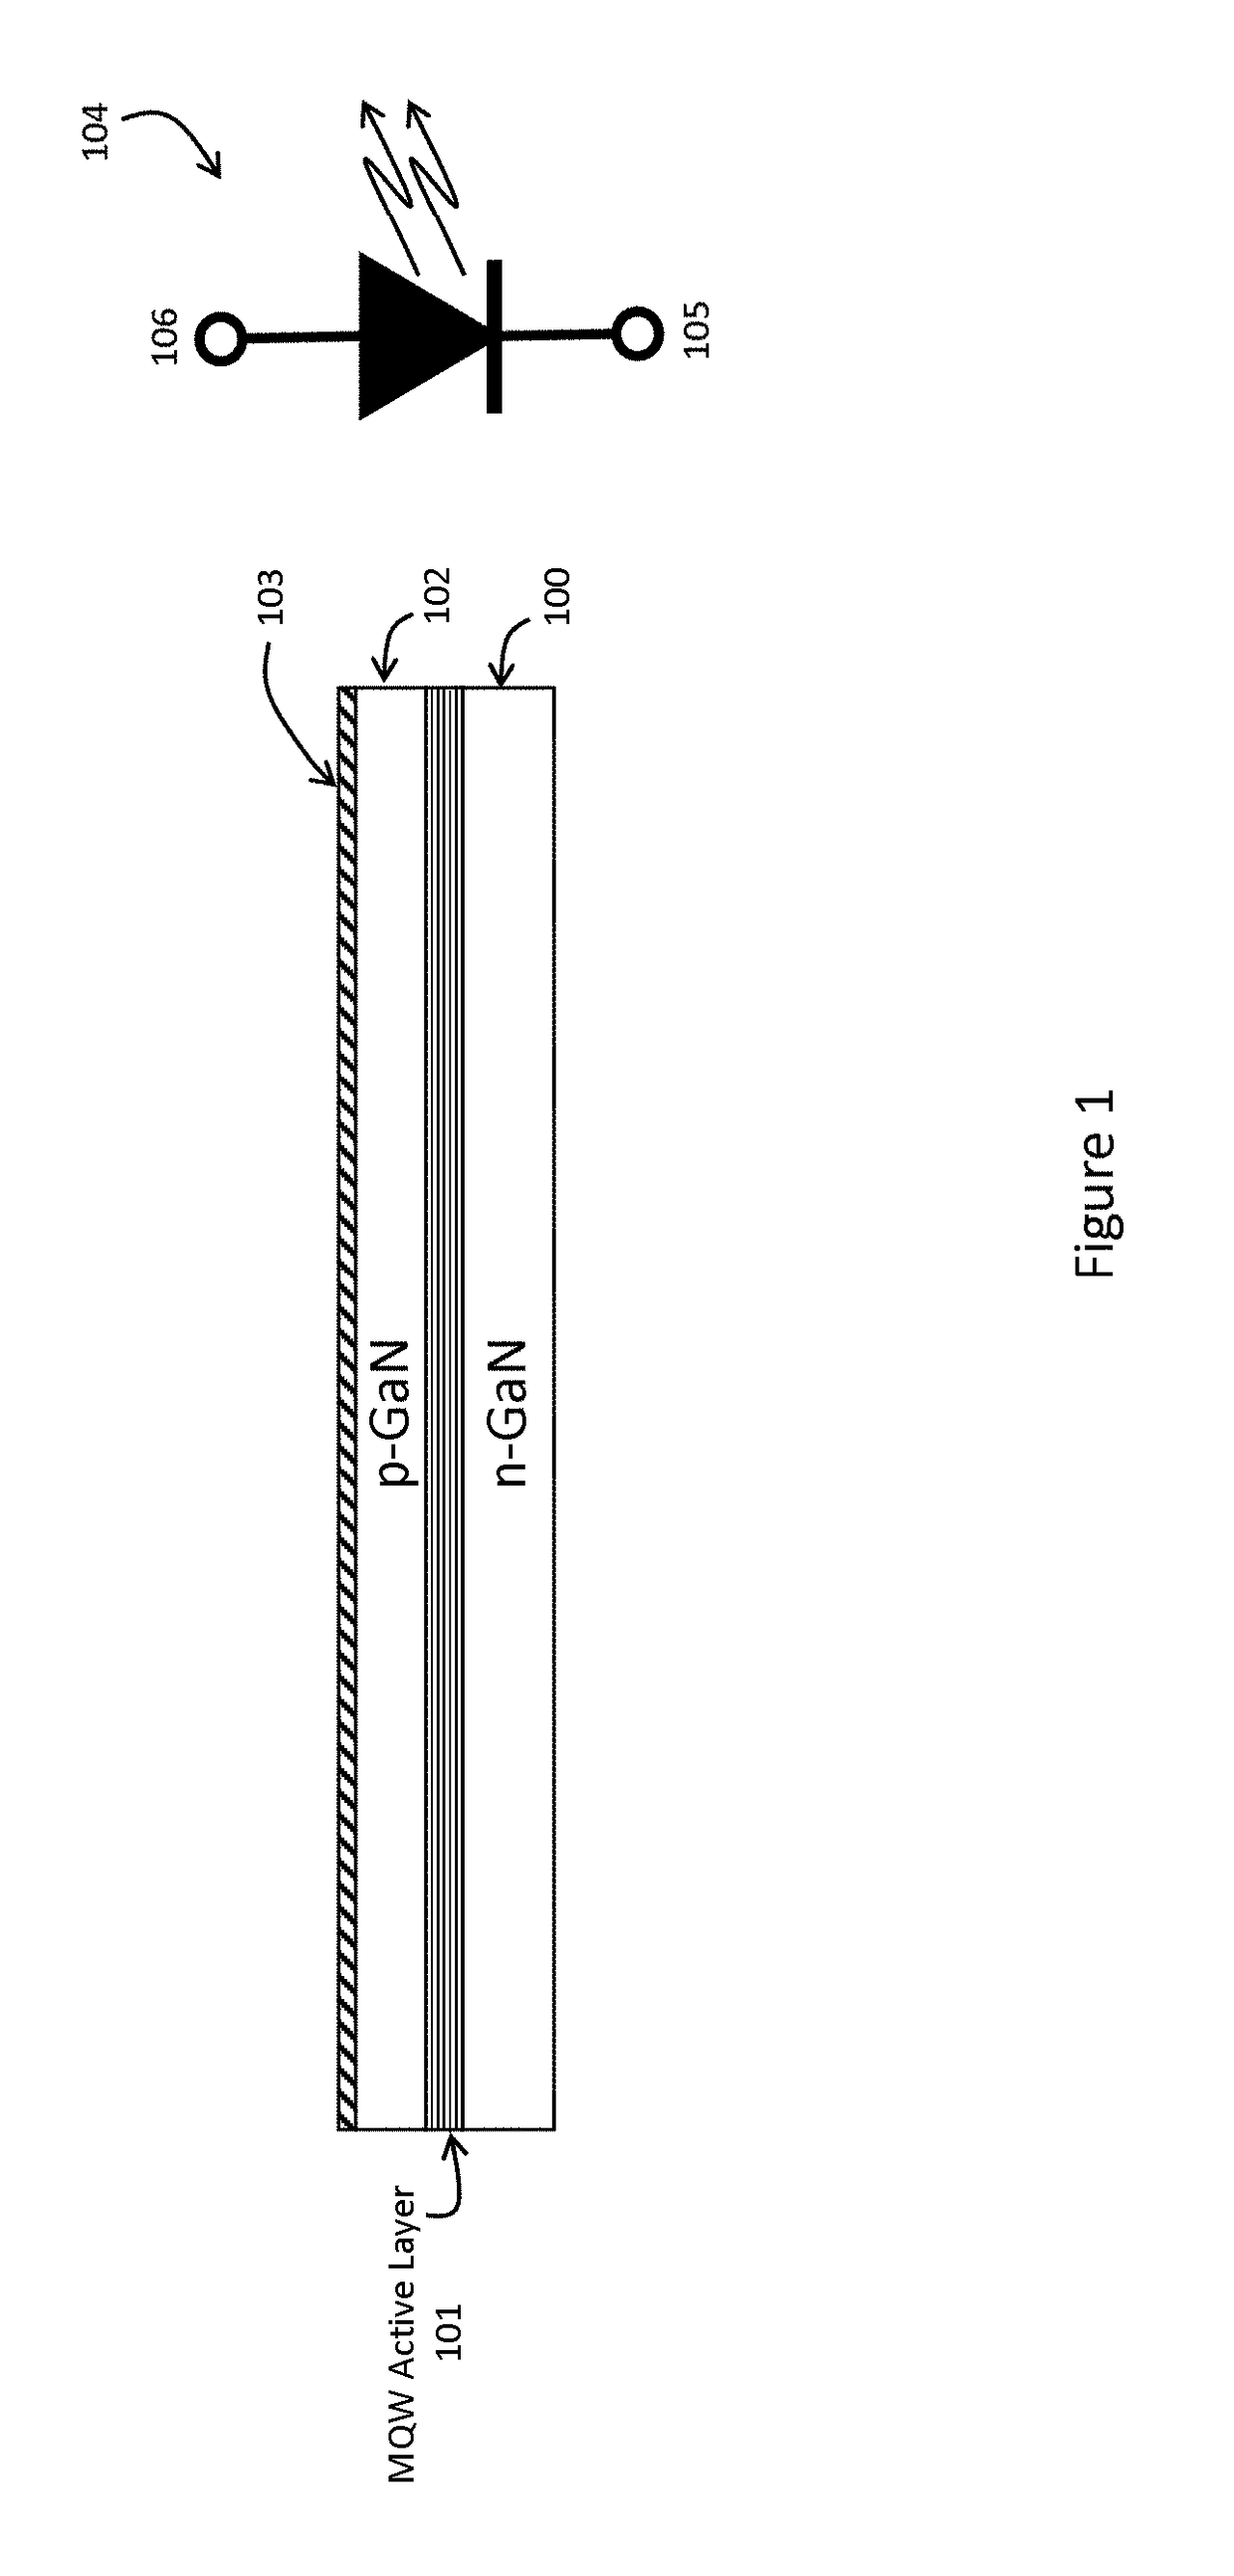 Light emitting diode (LED) test apparatus and method of manufacture